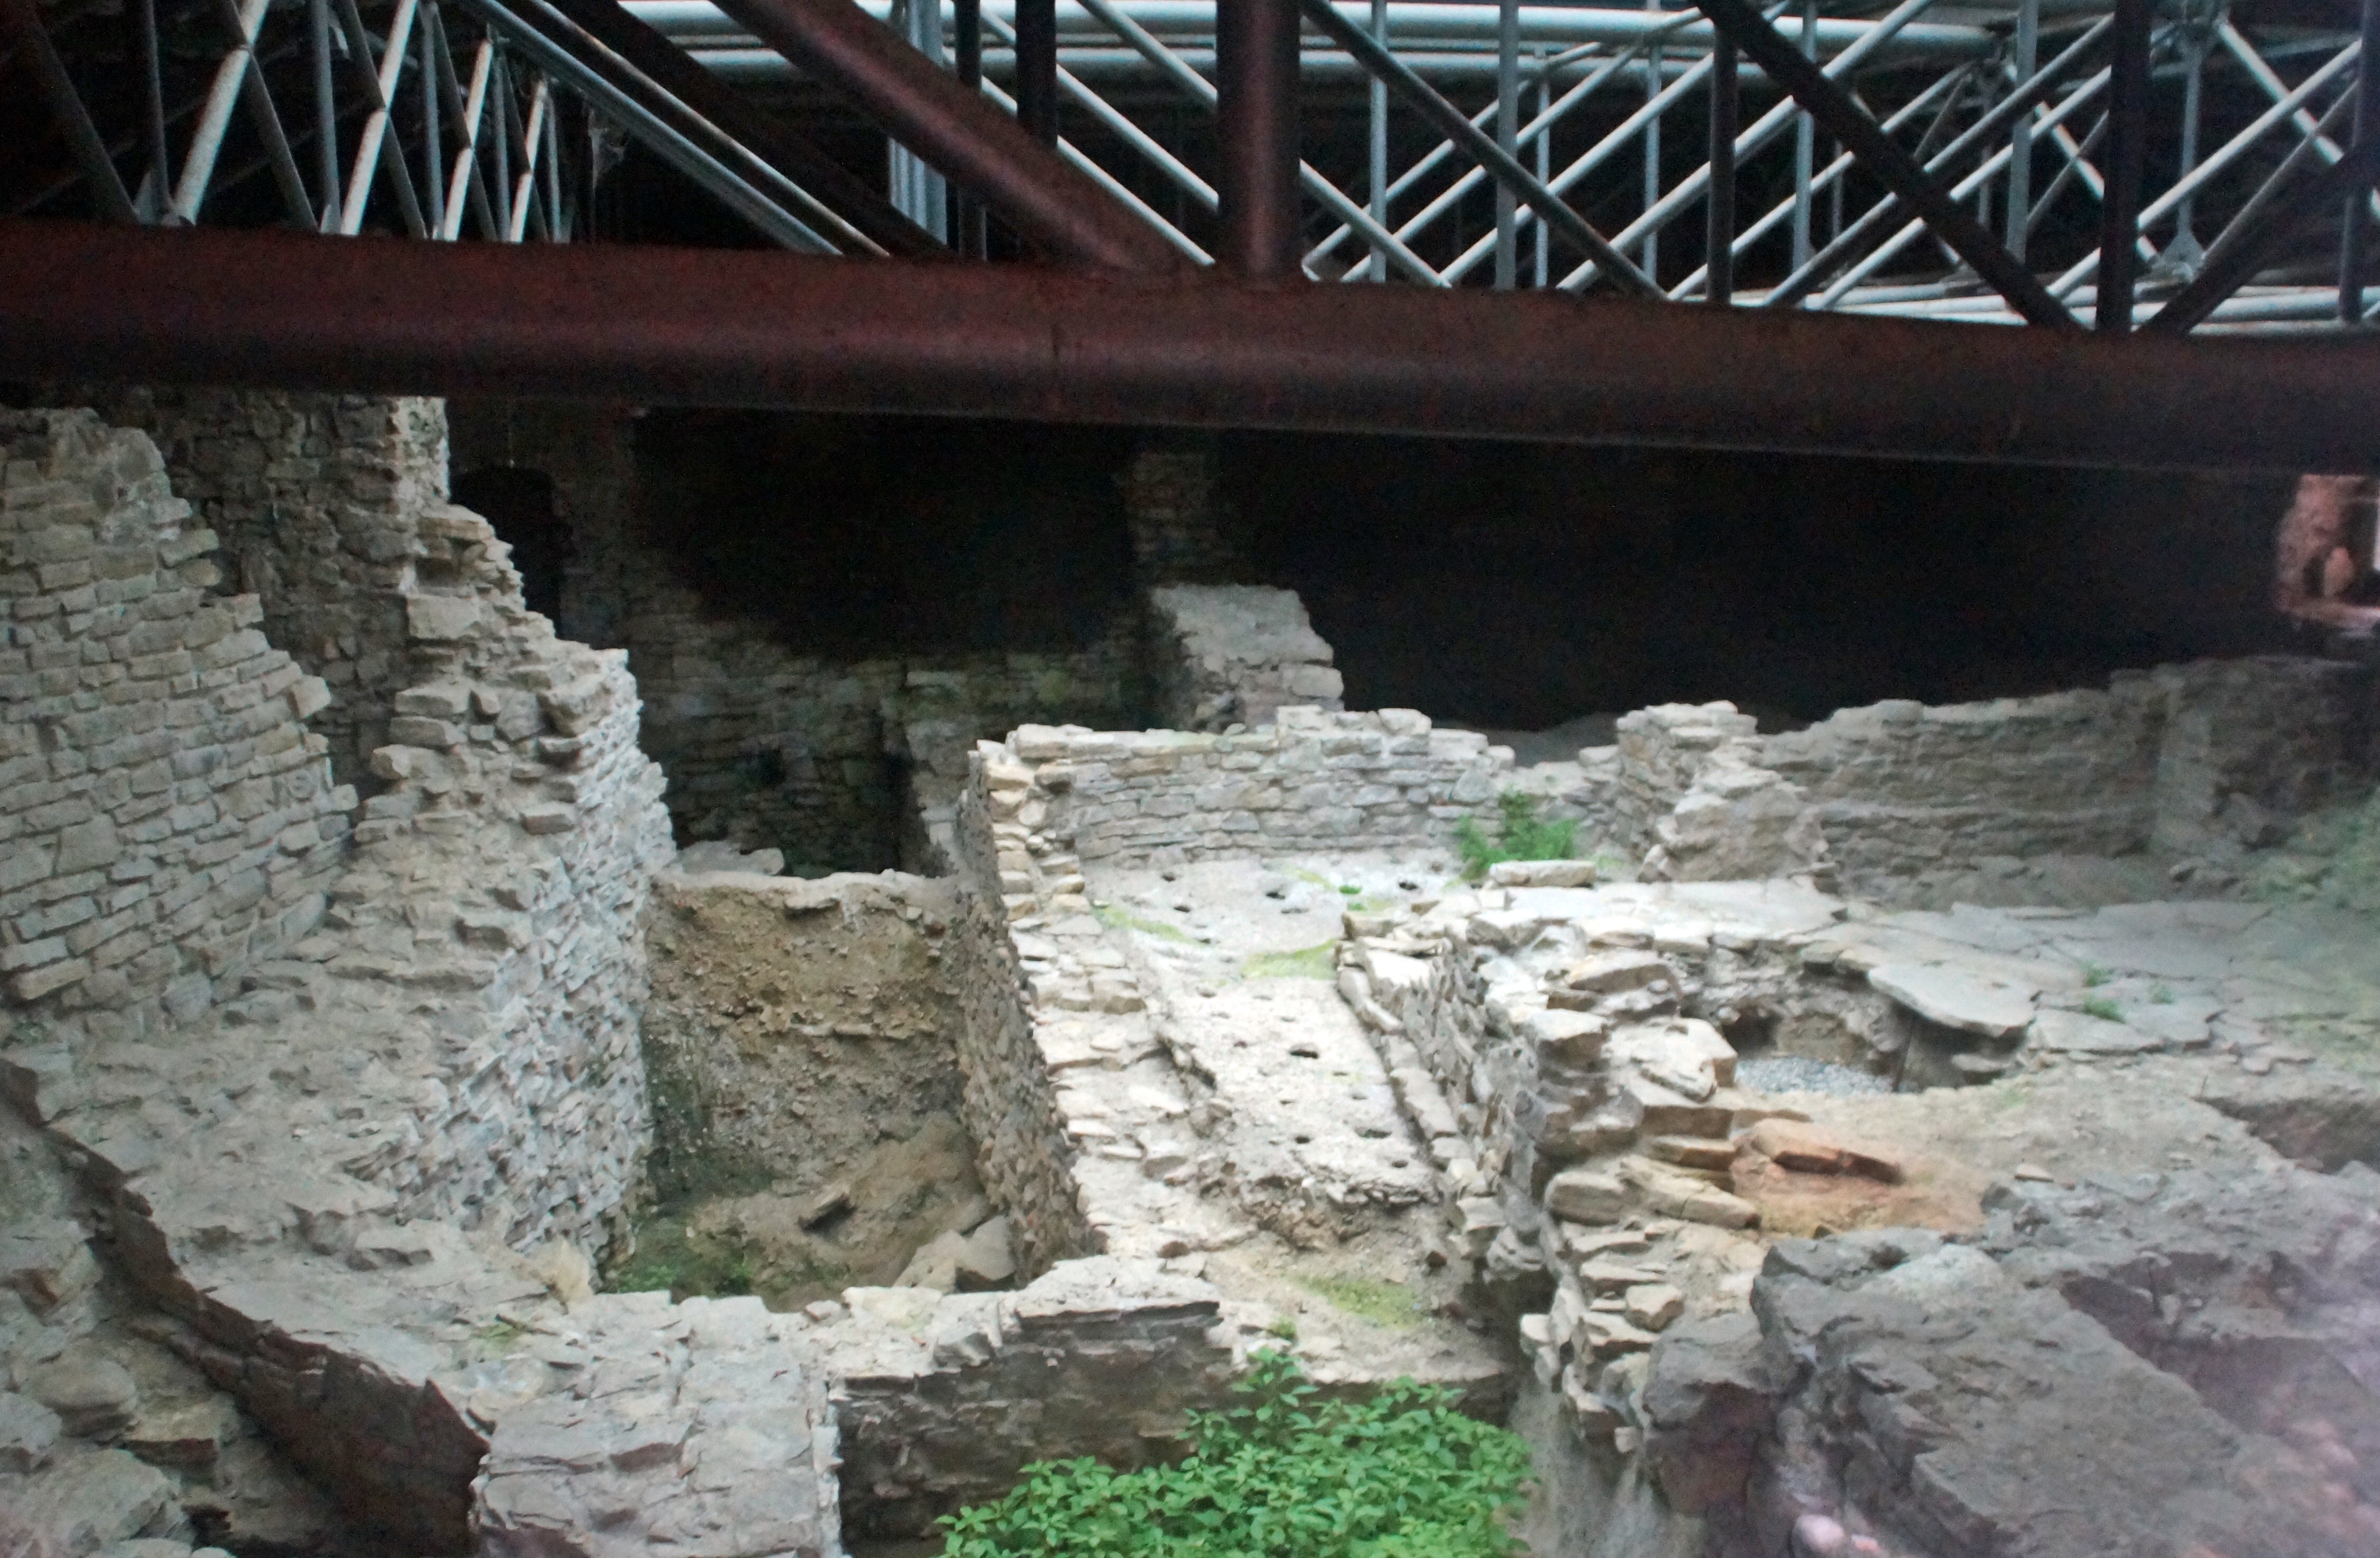 The archaeological site